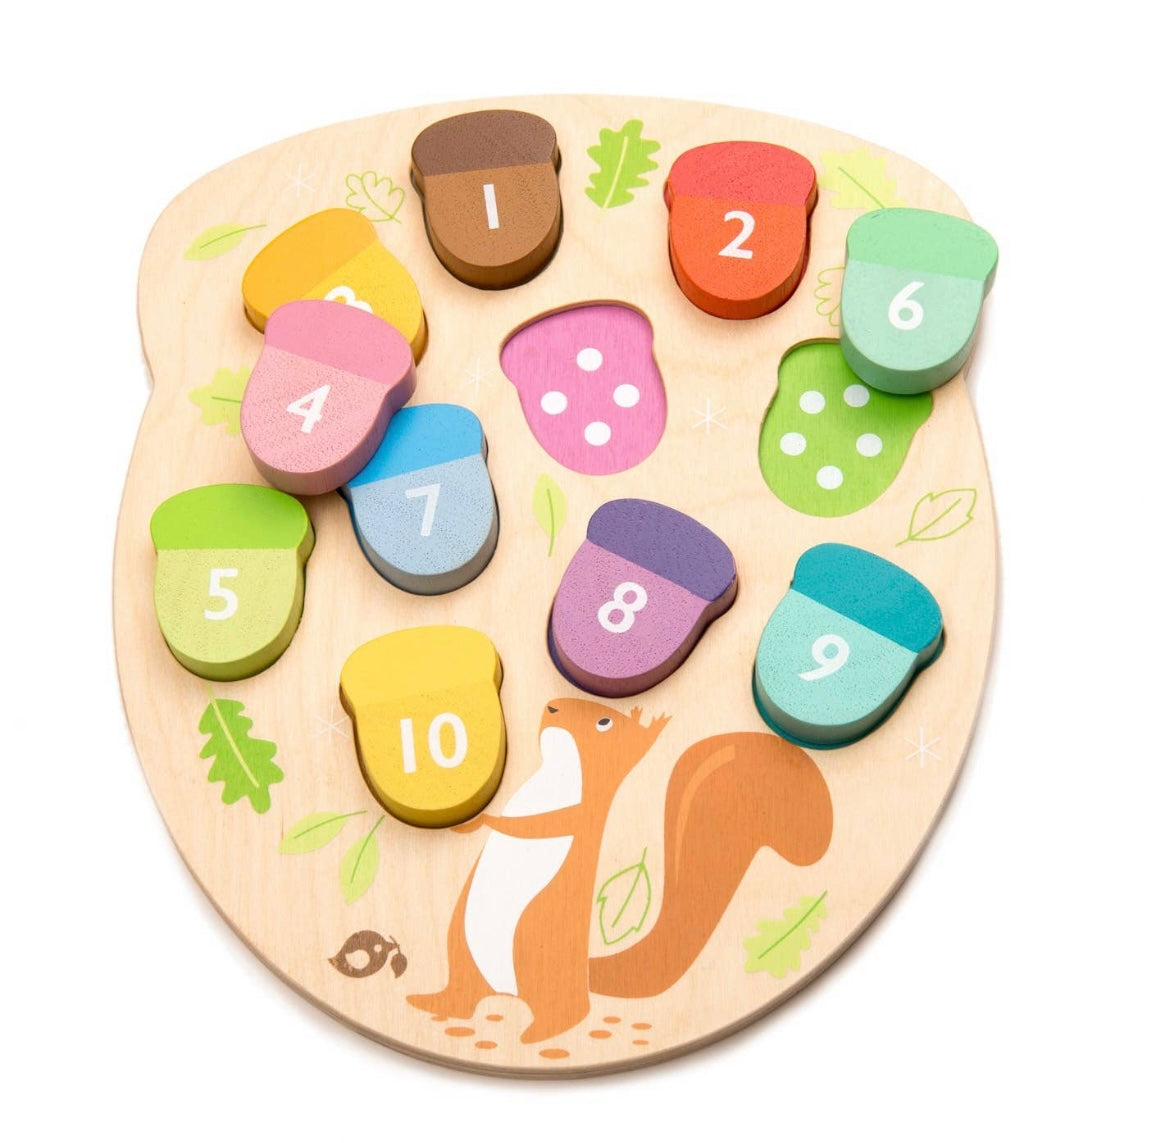 Acorns Counting Game